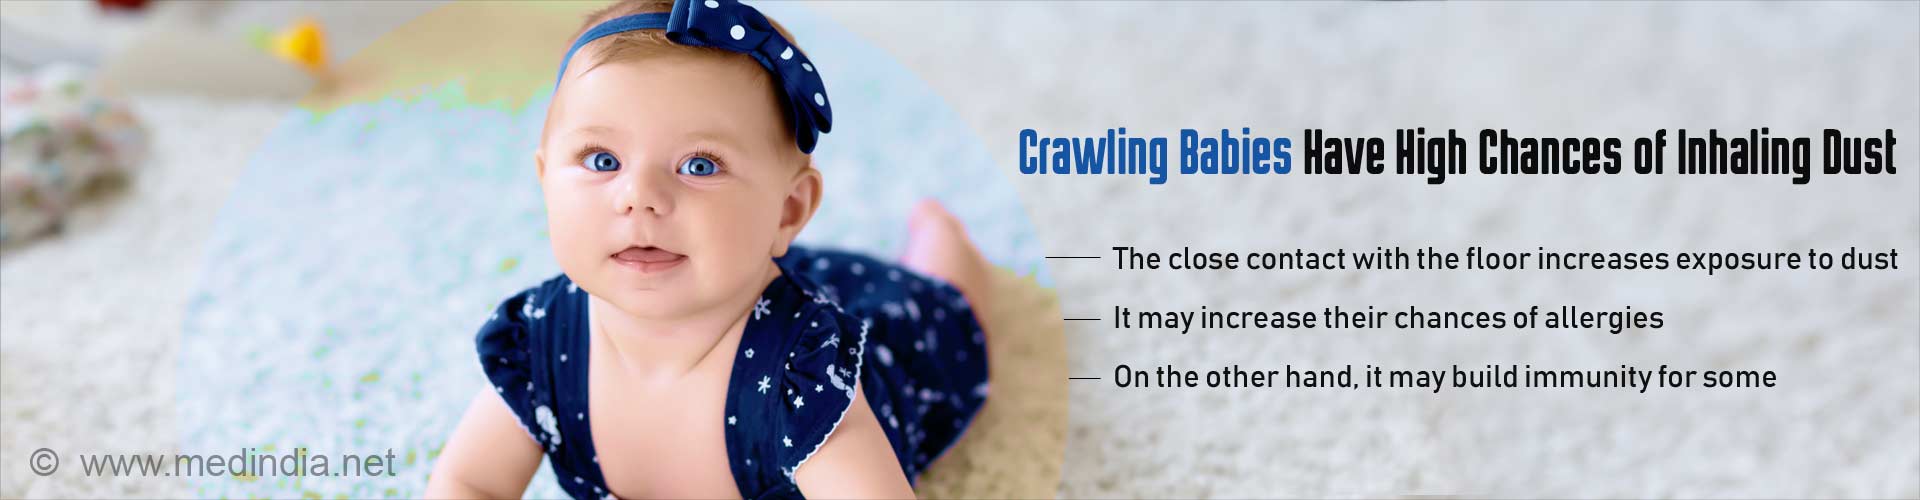 Crawling babies have high chances of inhaling dust
- close contact with the floor increases exposure to dust
- it may increase their chances of allergies
- on the other hand, it may build immunity for some